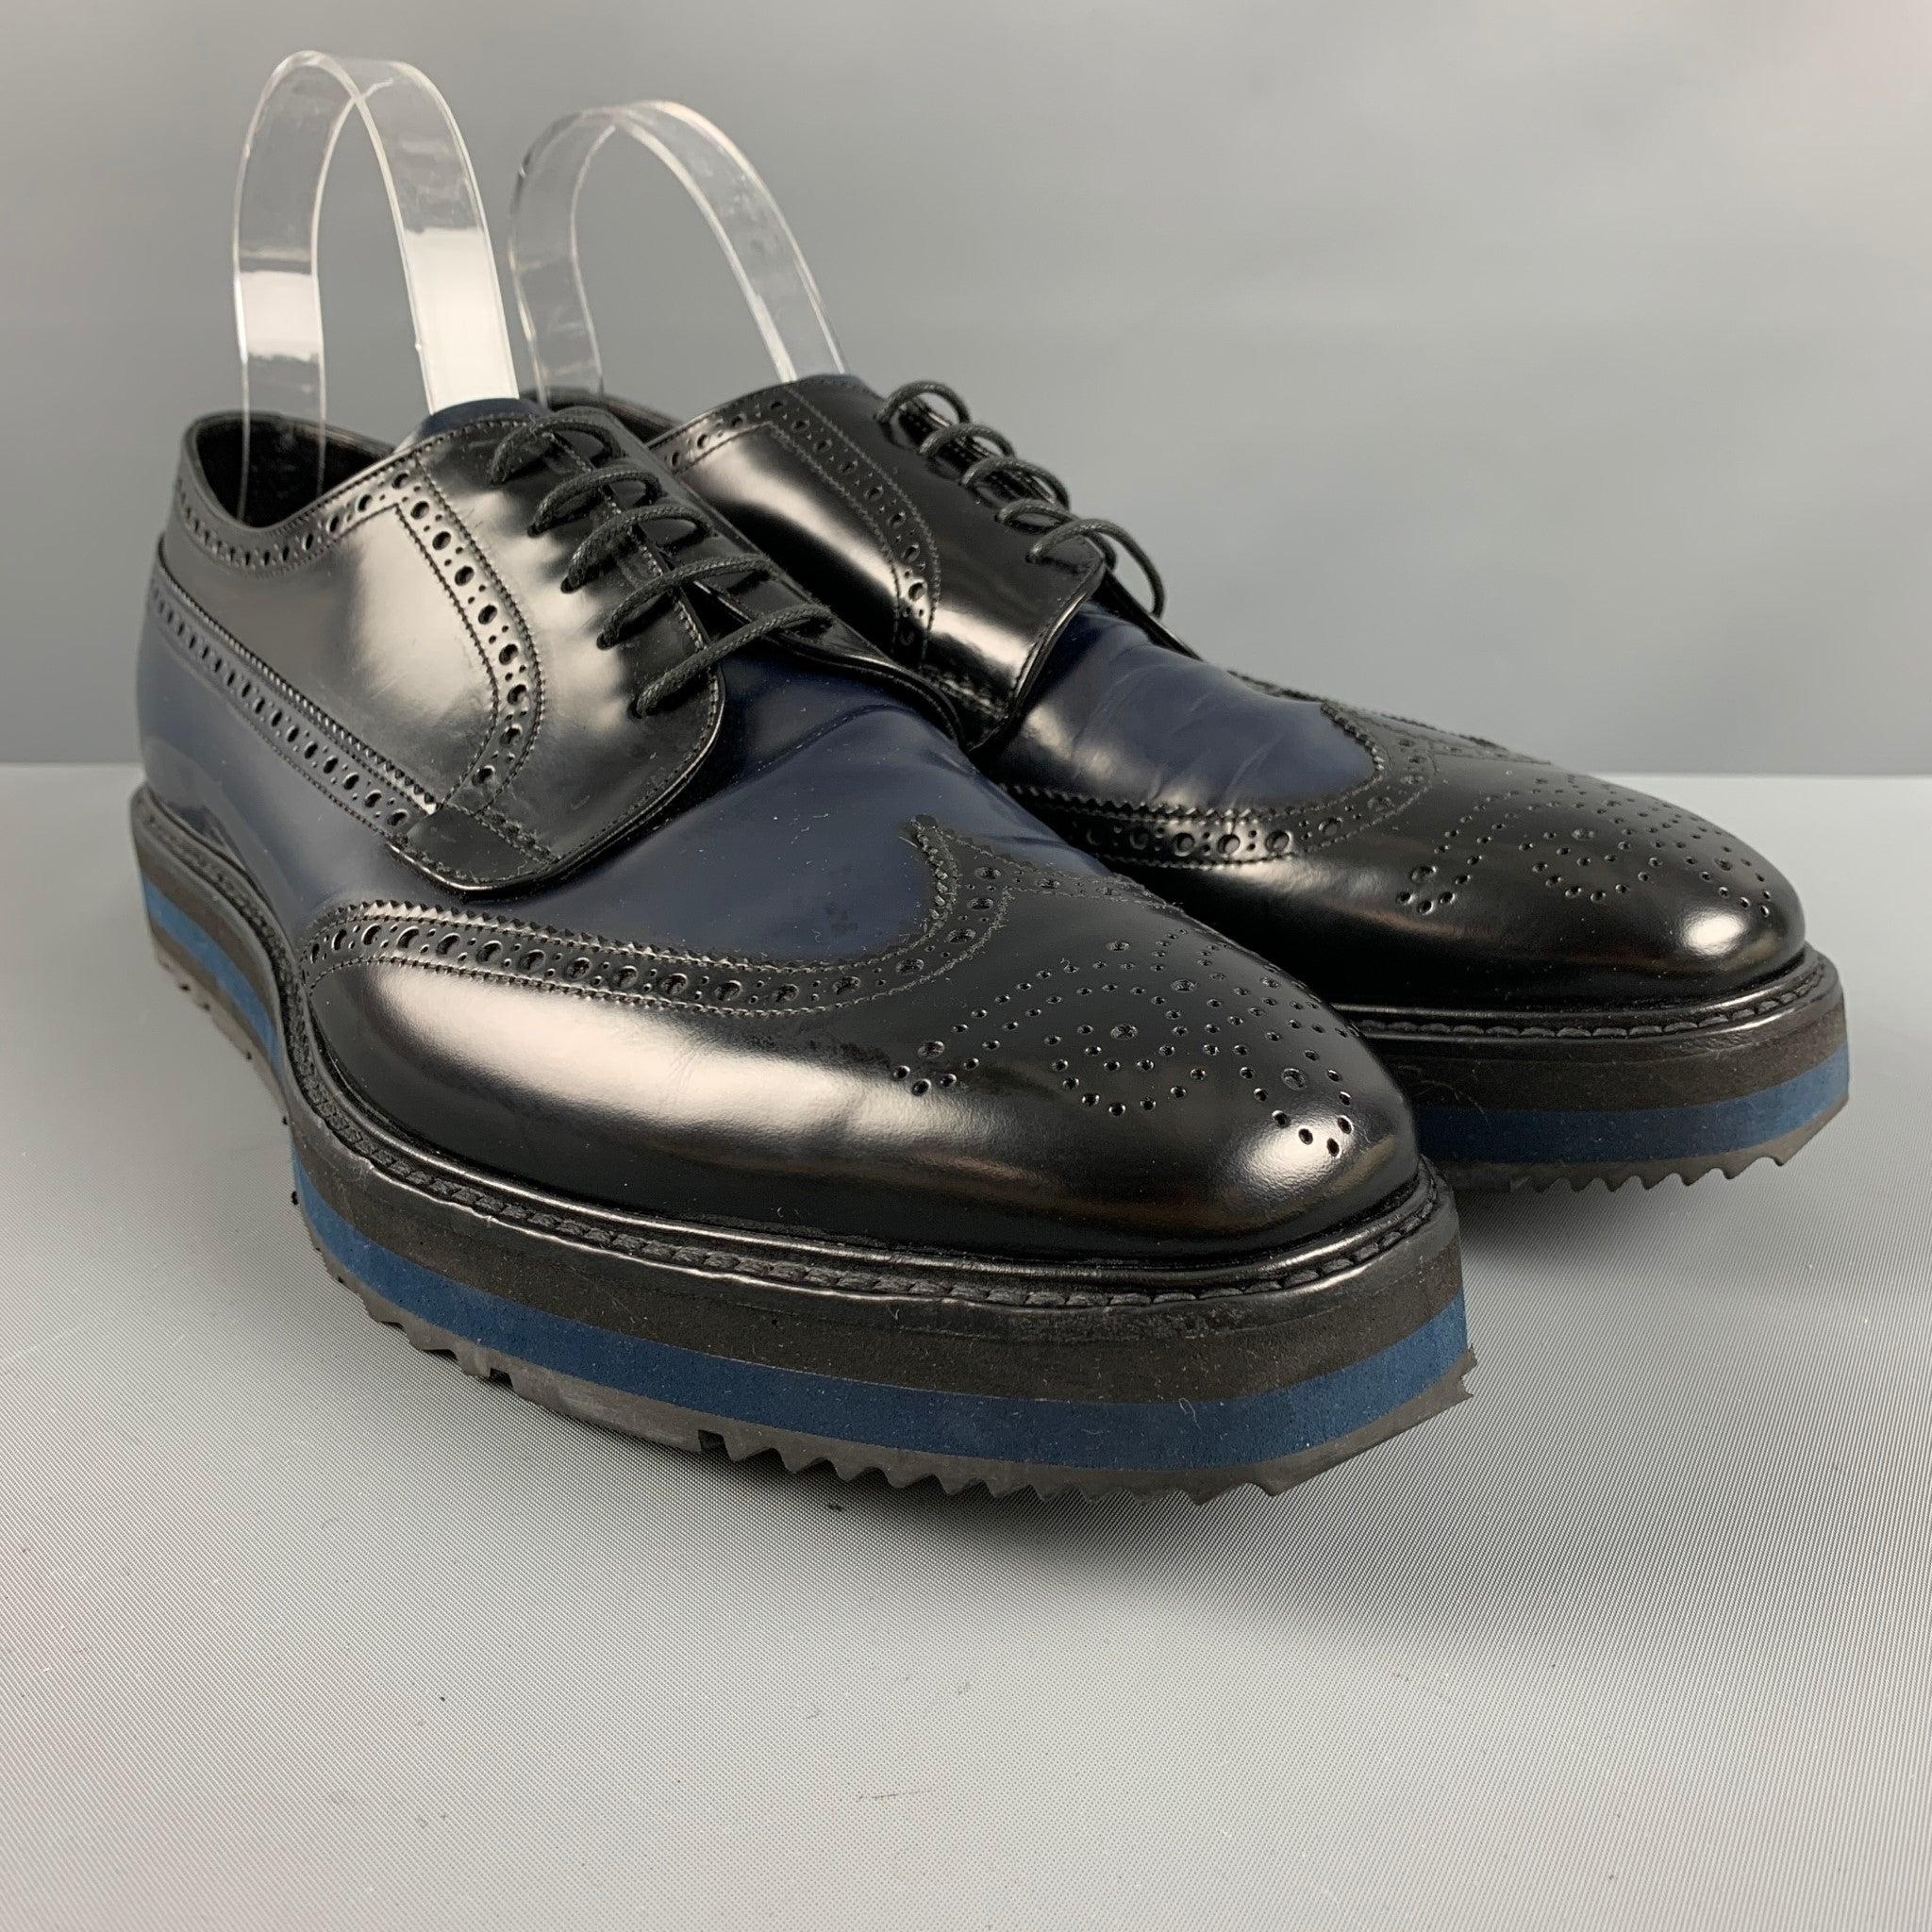 PRADA shoes comes in a black and navy perforated leather featuring a square toe, platform, rubber sole, and a lace up closure. Made in Italy.Excellent Pre-Owned Condition. Minor signs of wear. 

Marked:   2EG 015 10Outsole: 4.5 inches  x 13 inches 